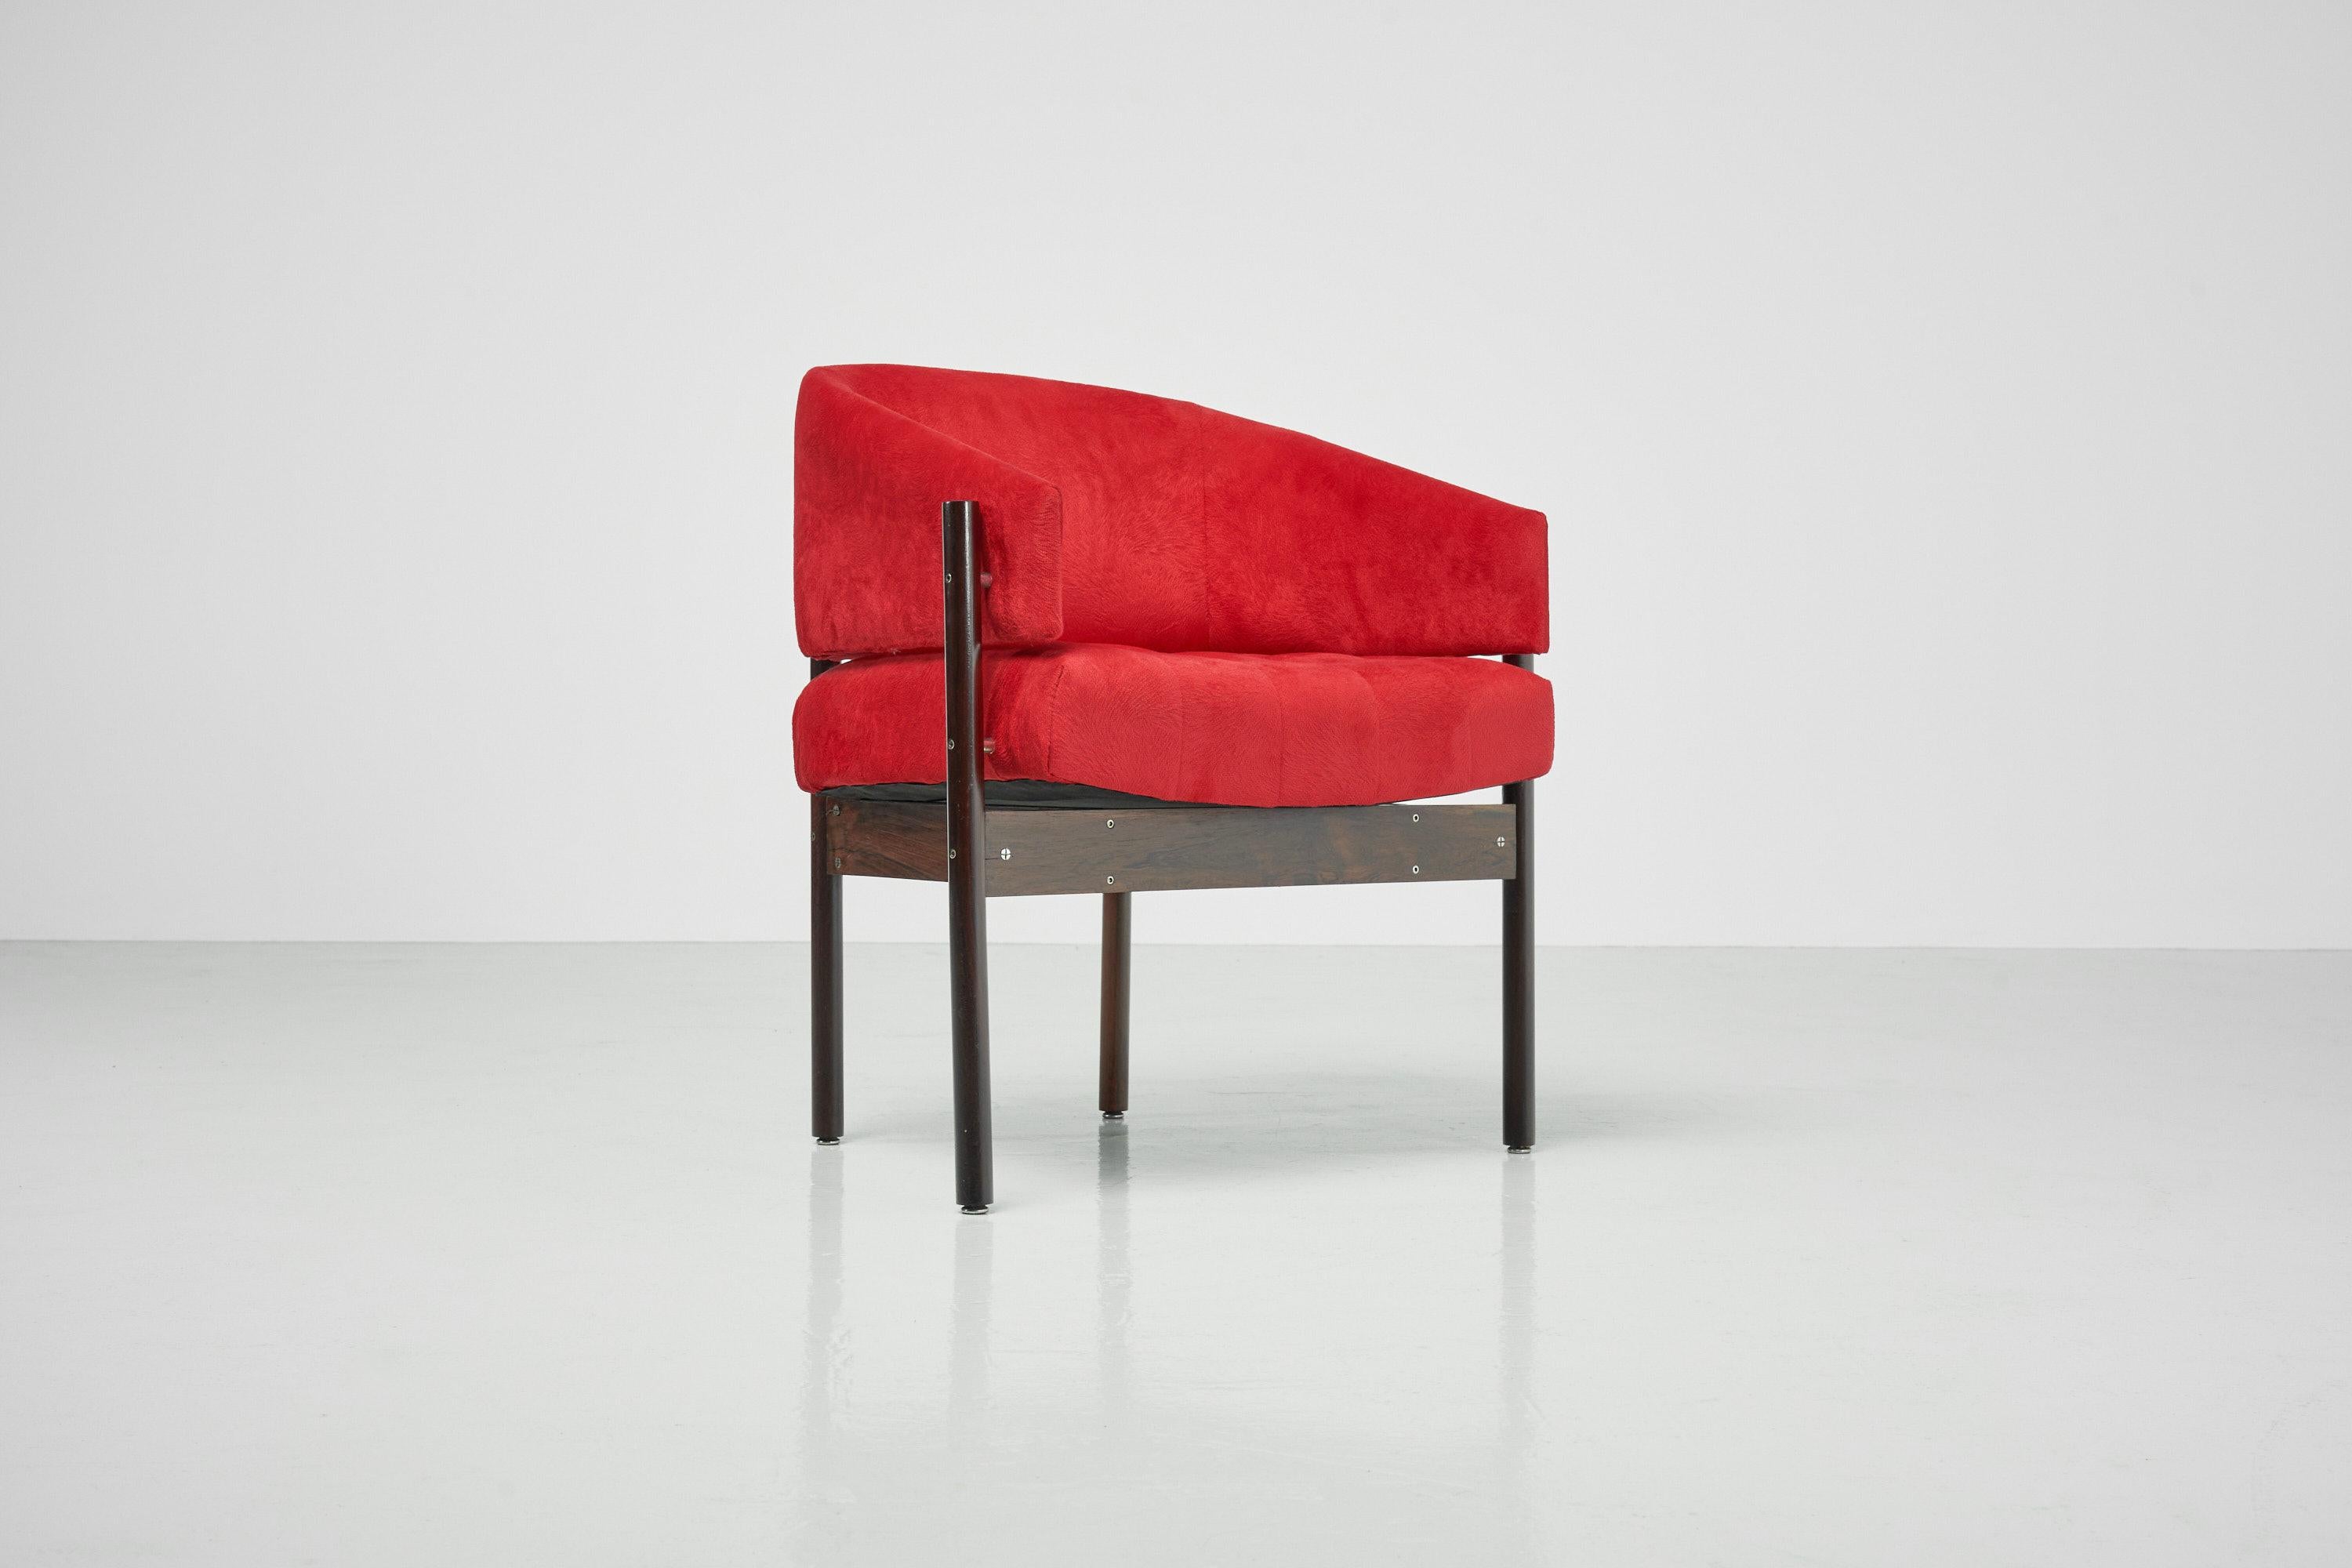 Comfortable so-called Senior armchair designed by Jorge Zalszupin and manufactured by his own company L'Atelier, Brazil 1959. The Senior chair is a minimalist and early design and was produced from the beginning in 1959 up till 1969. The chair has